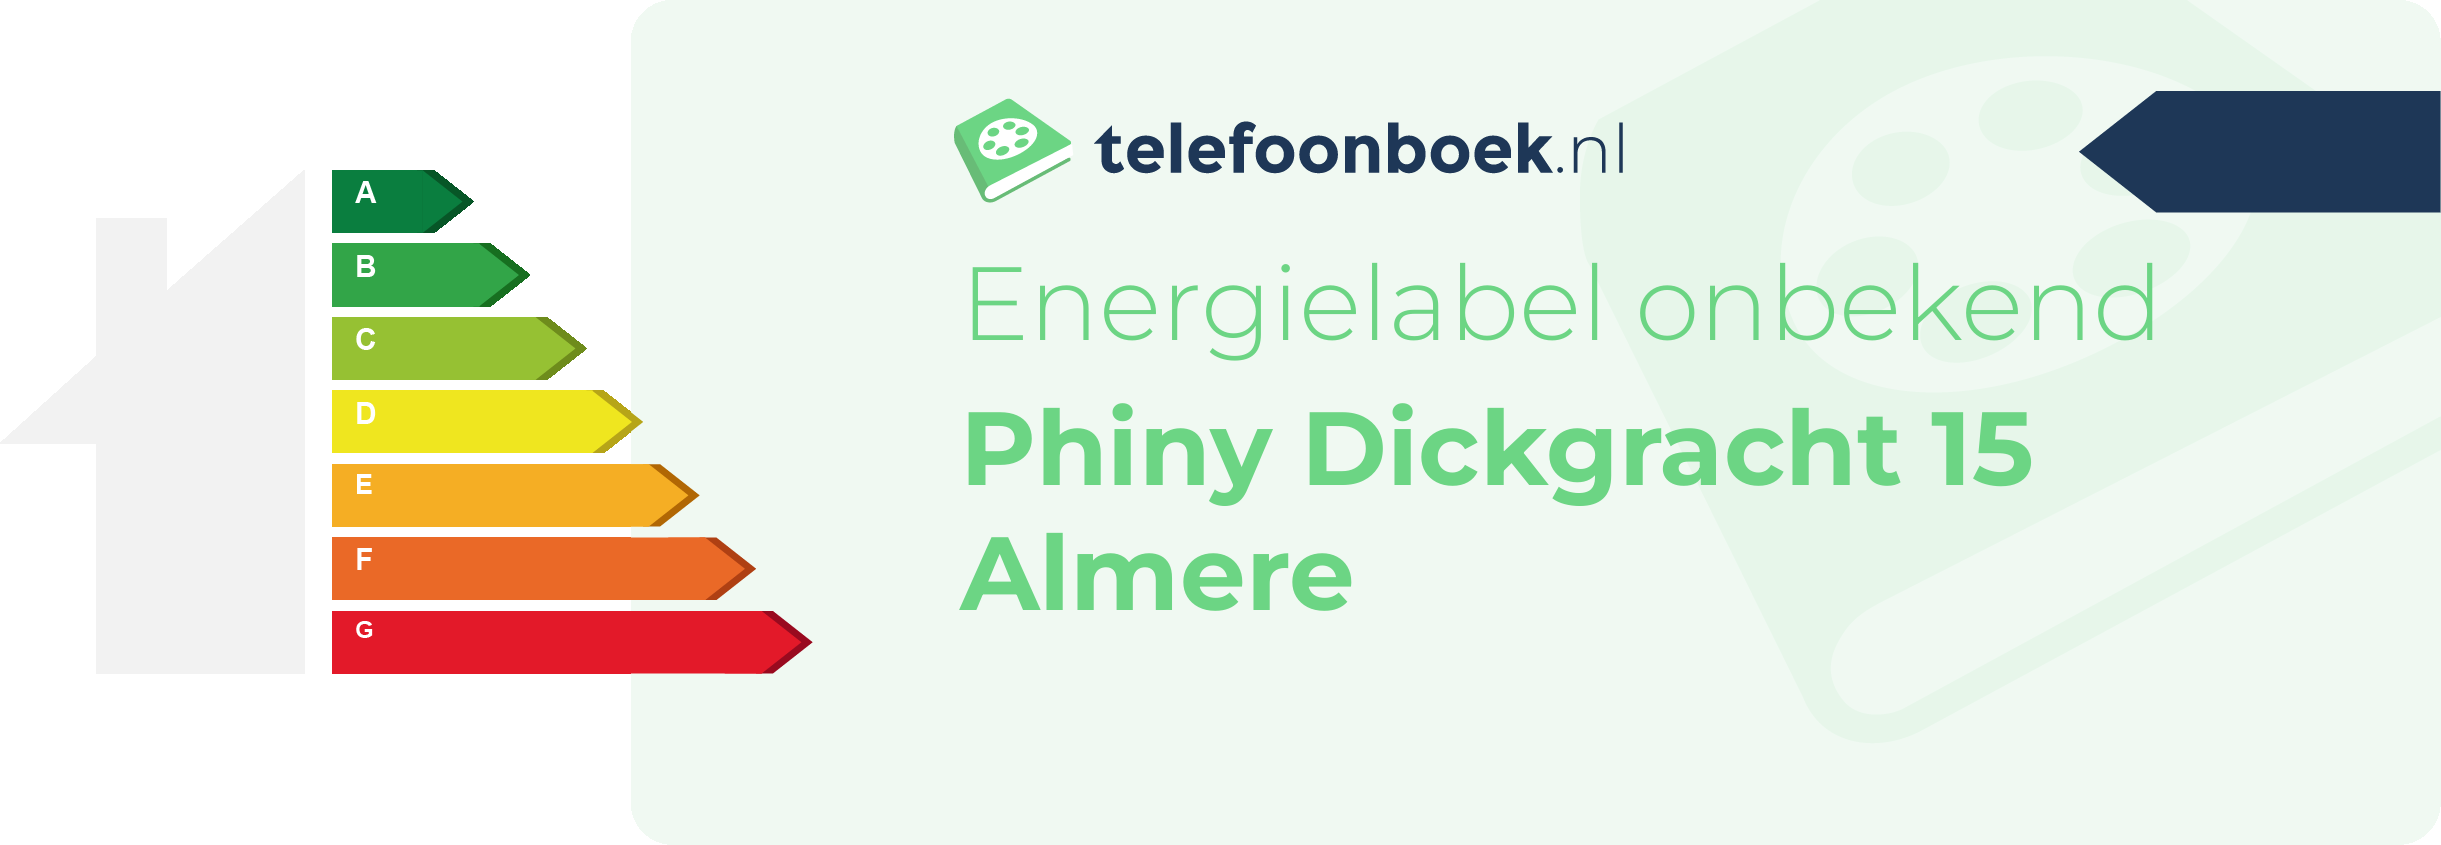 Energielabel Phiny Dickgracht 15 Almere